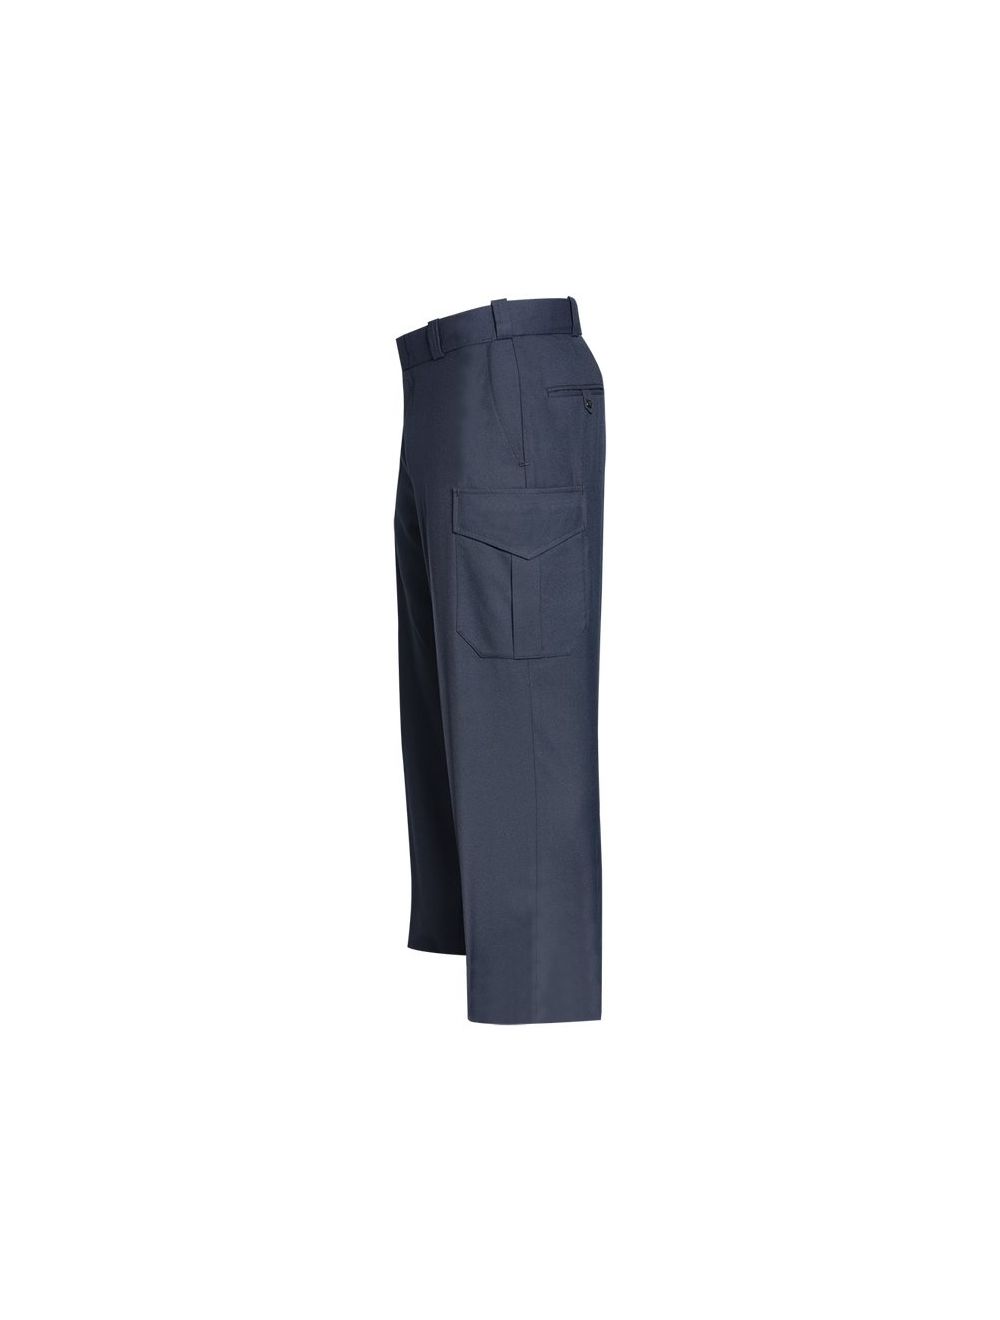 Deluxe Tactical Pants w/ Cargo Pockets